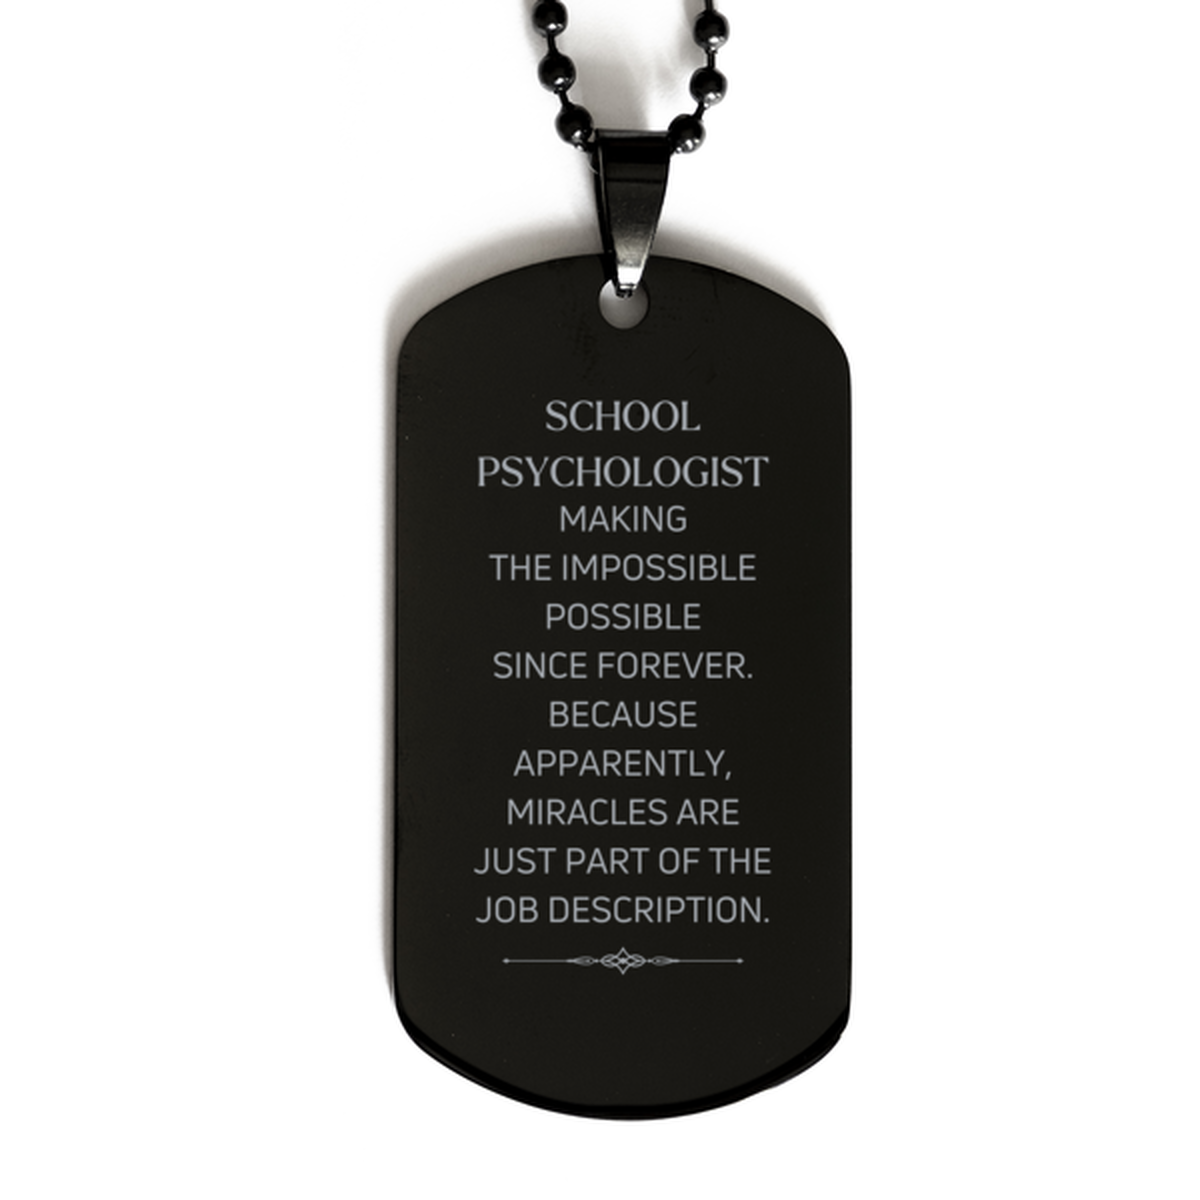 Funny School Psychologist Gifts, Miracles are just part of the job description, Inspirational Birthday Black Dog Tag For School Psychologist, Men, Women, Coworkers, Friends, Boss